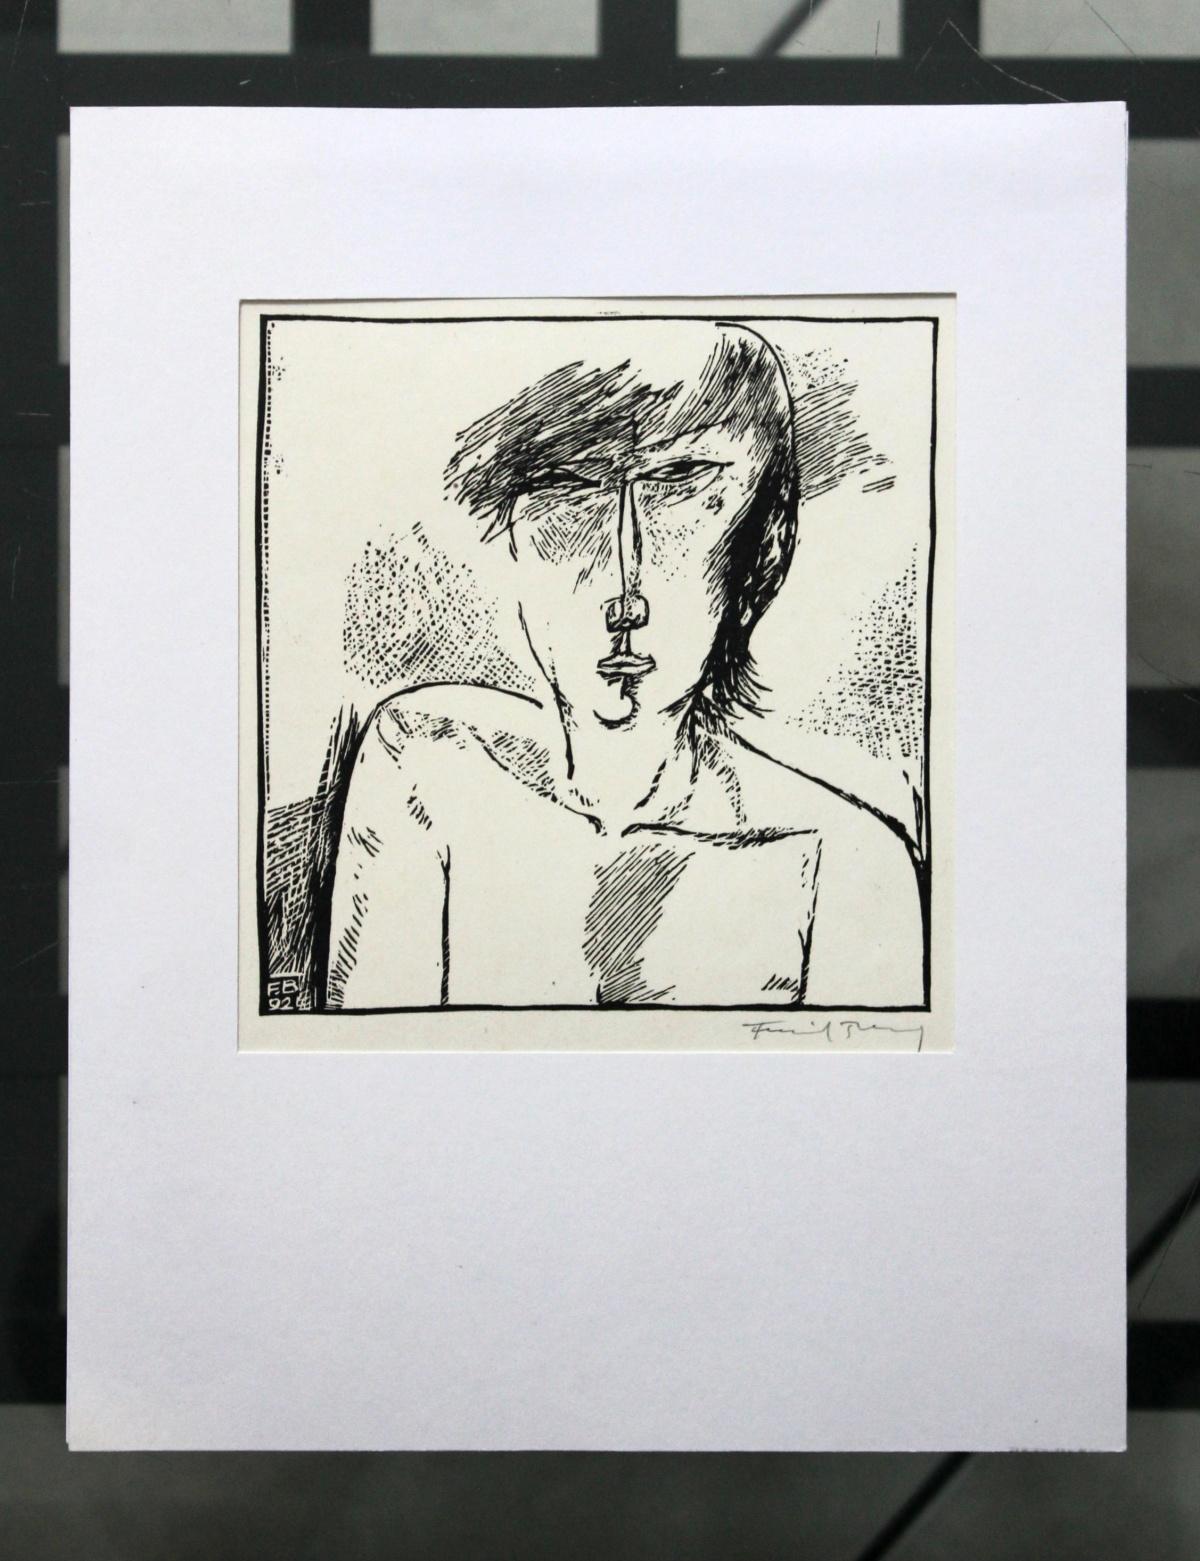 B's portrait - XXI century, Black and white etching - Other Art Style Painting by Franciszek Bunsch